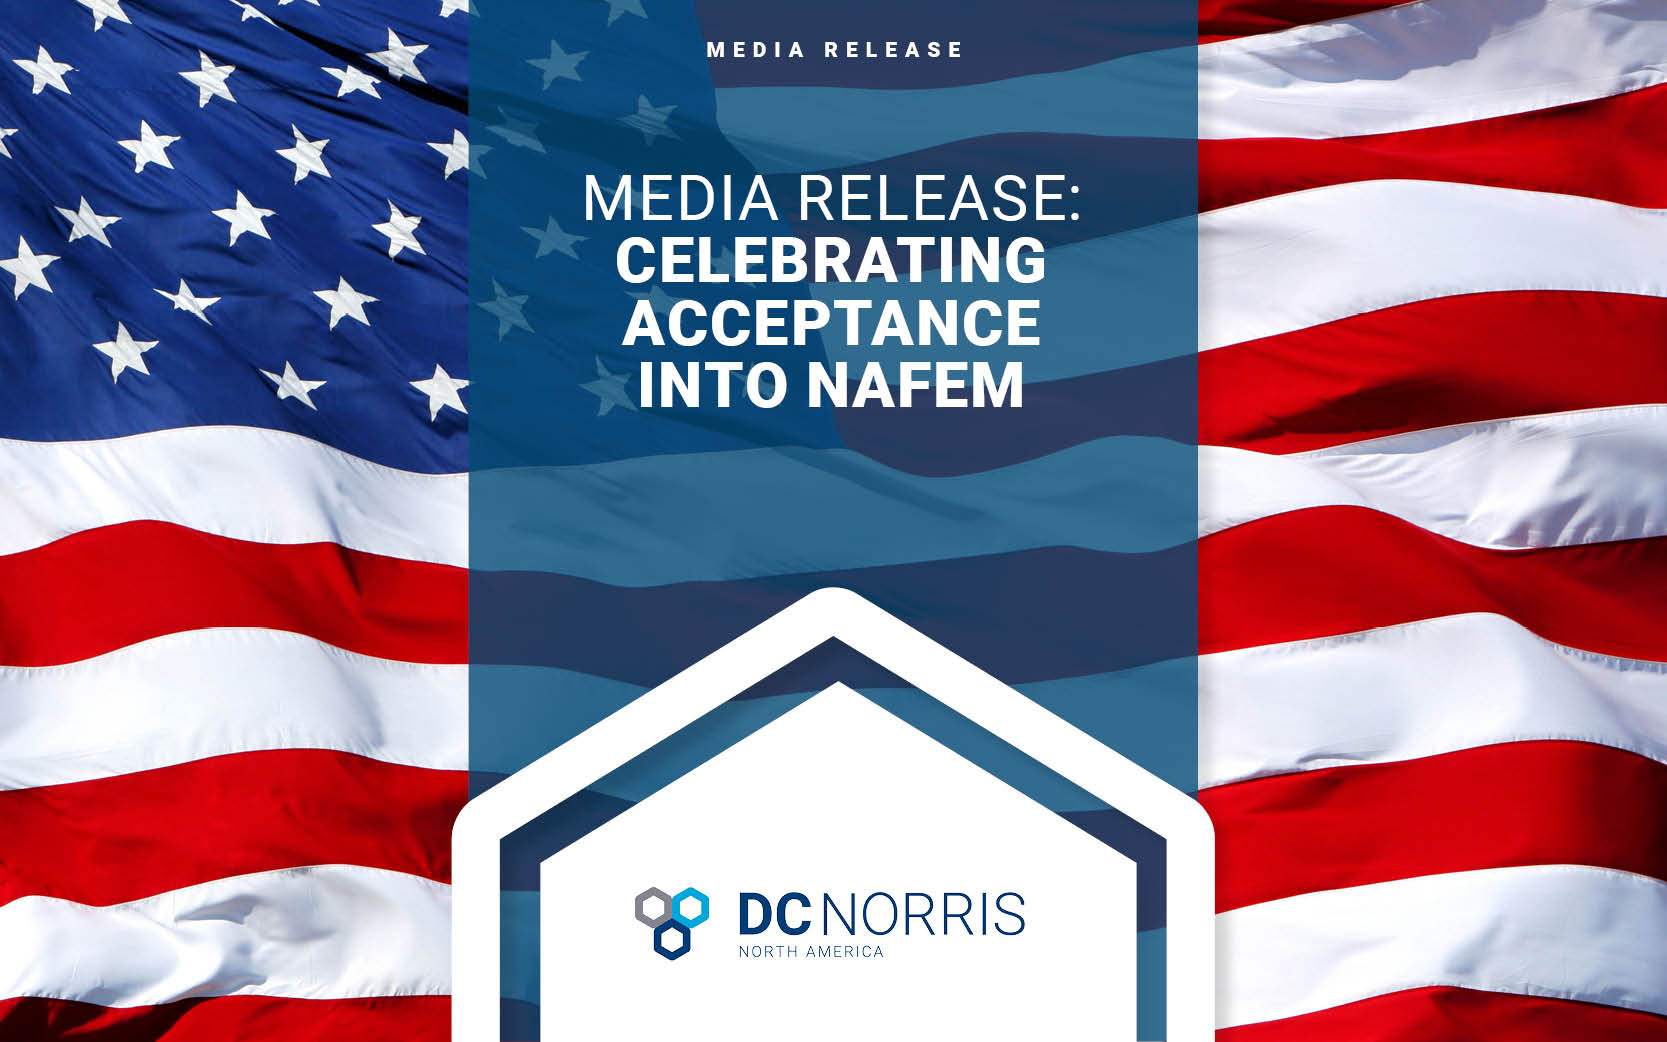 the American Flag is spanning the background with a headline about the DC Norris North America logo that reads: Media Release: Celebrating Acceptance Into NAFEM